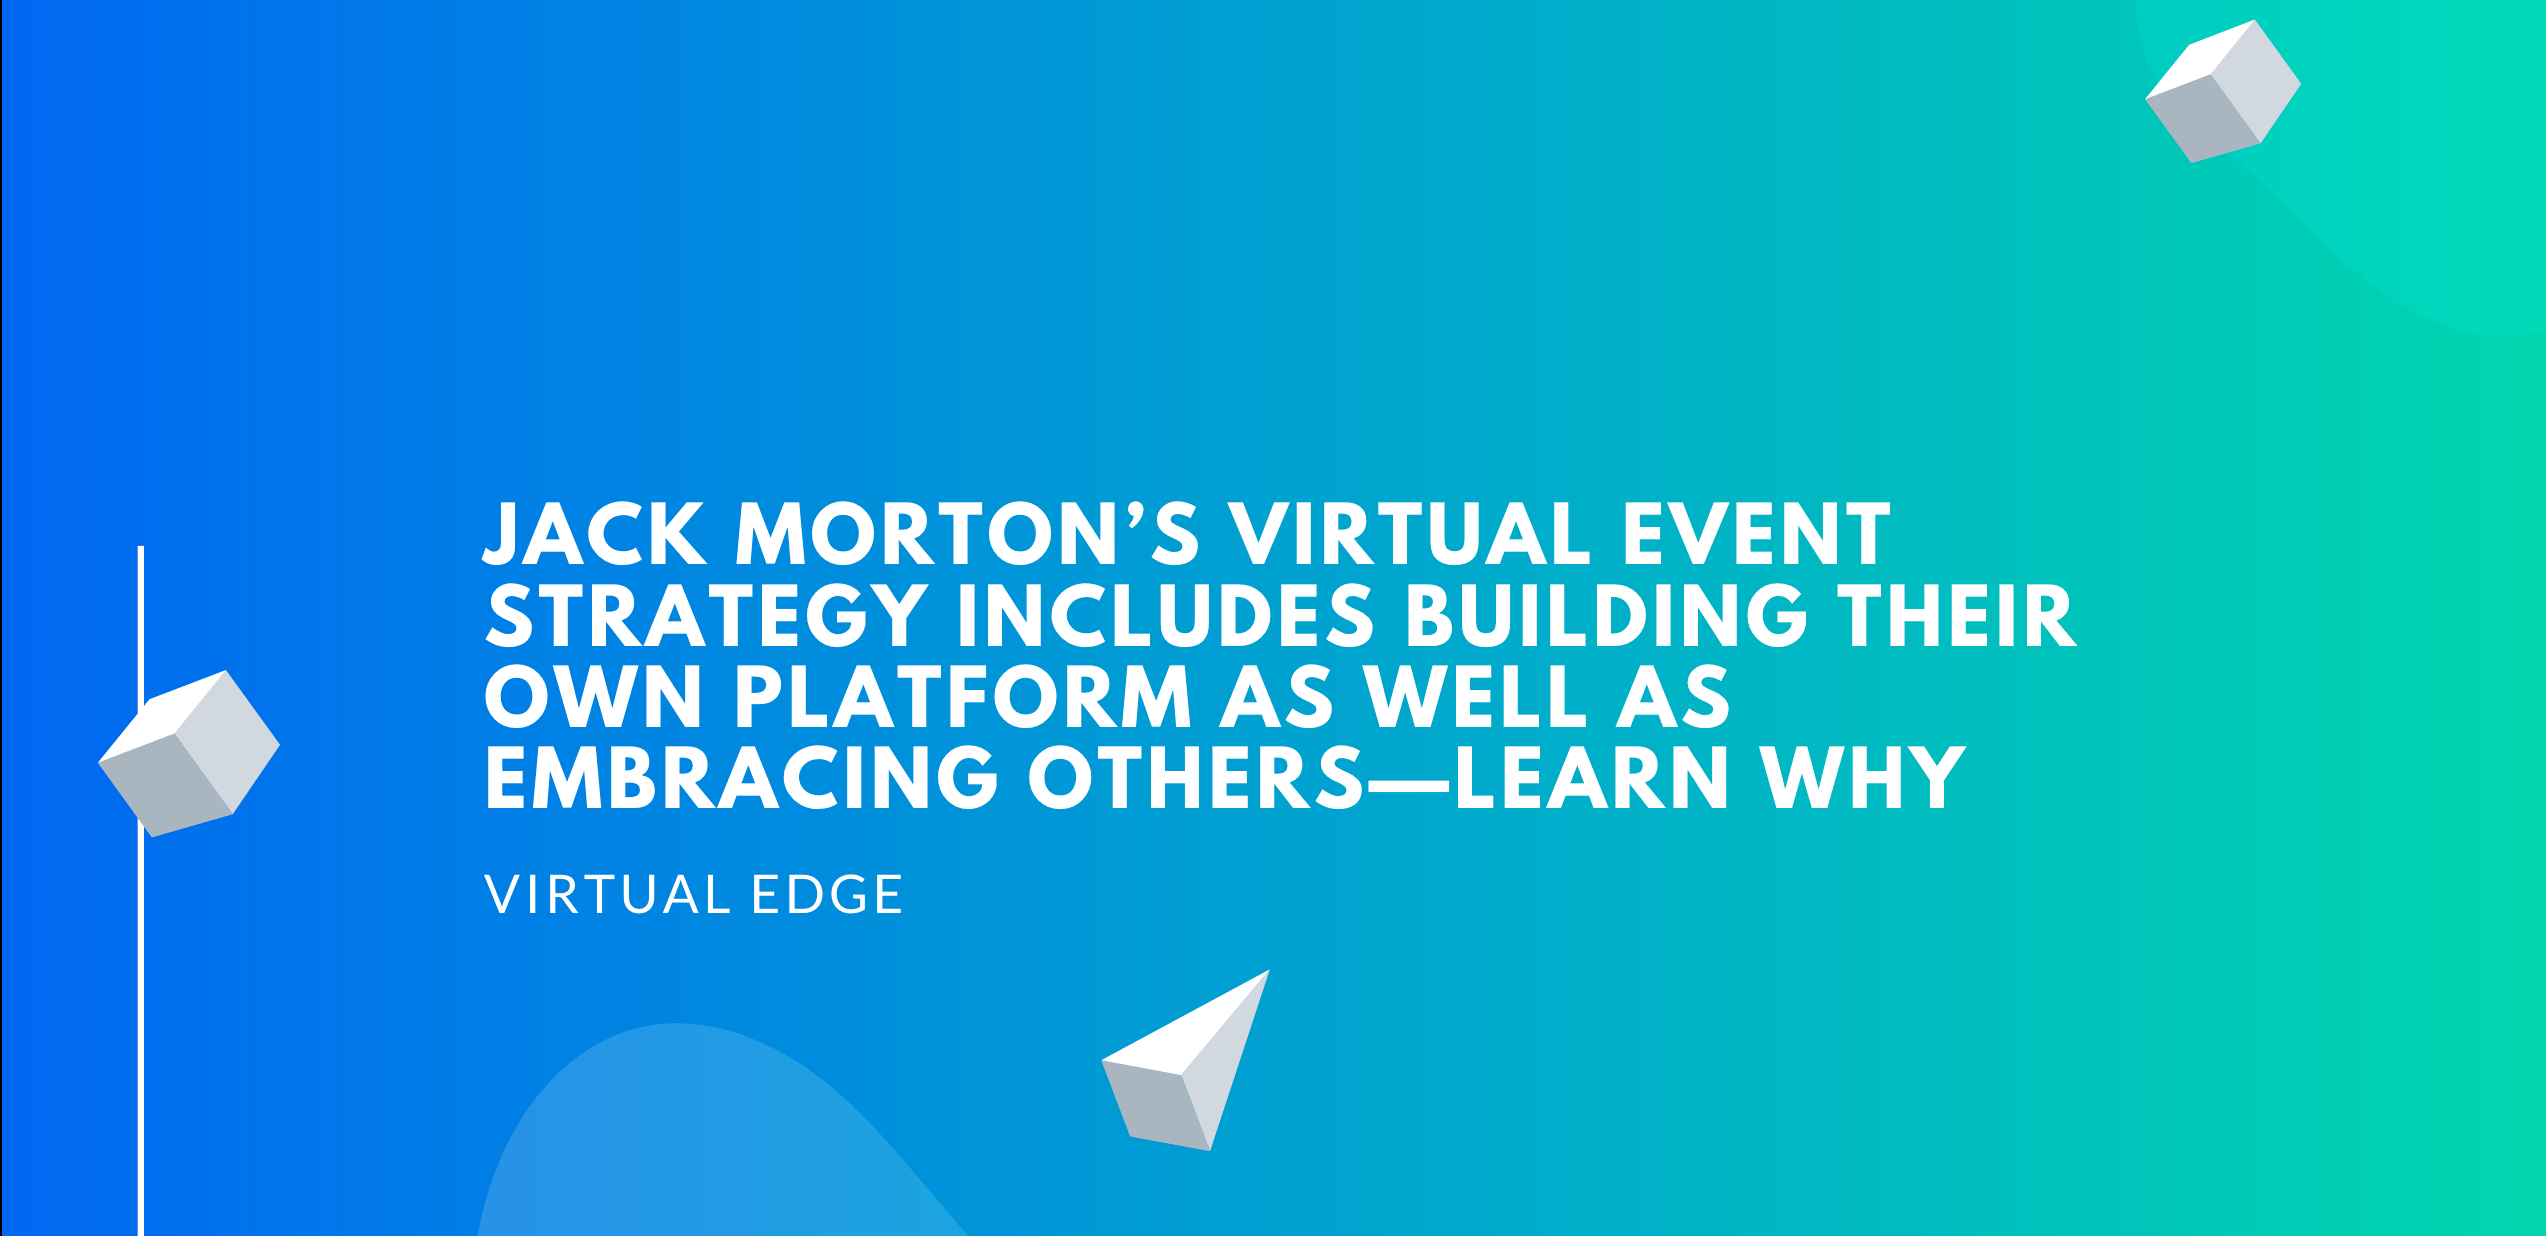 Jack Morton’s Virtual Event Strategy Includes Building Their Own Platform as well as Embracing Others—Learn Why